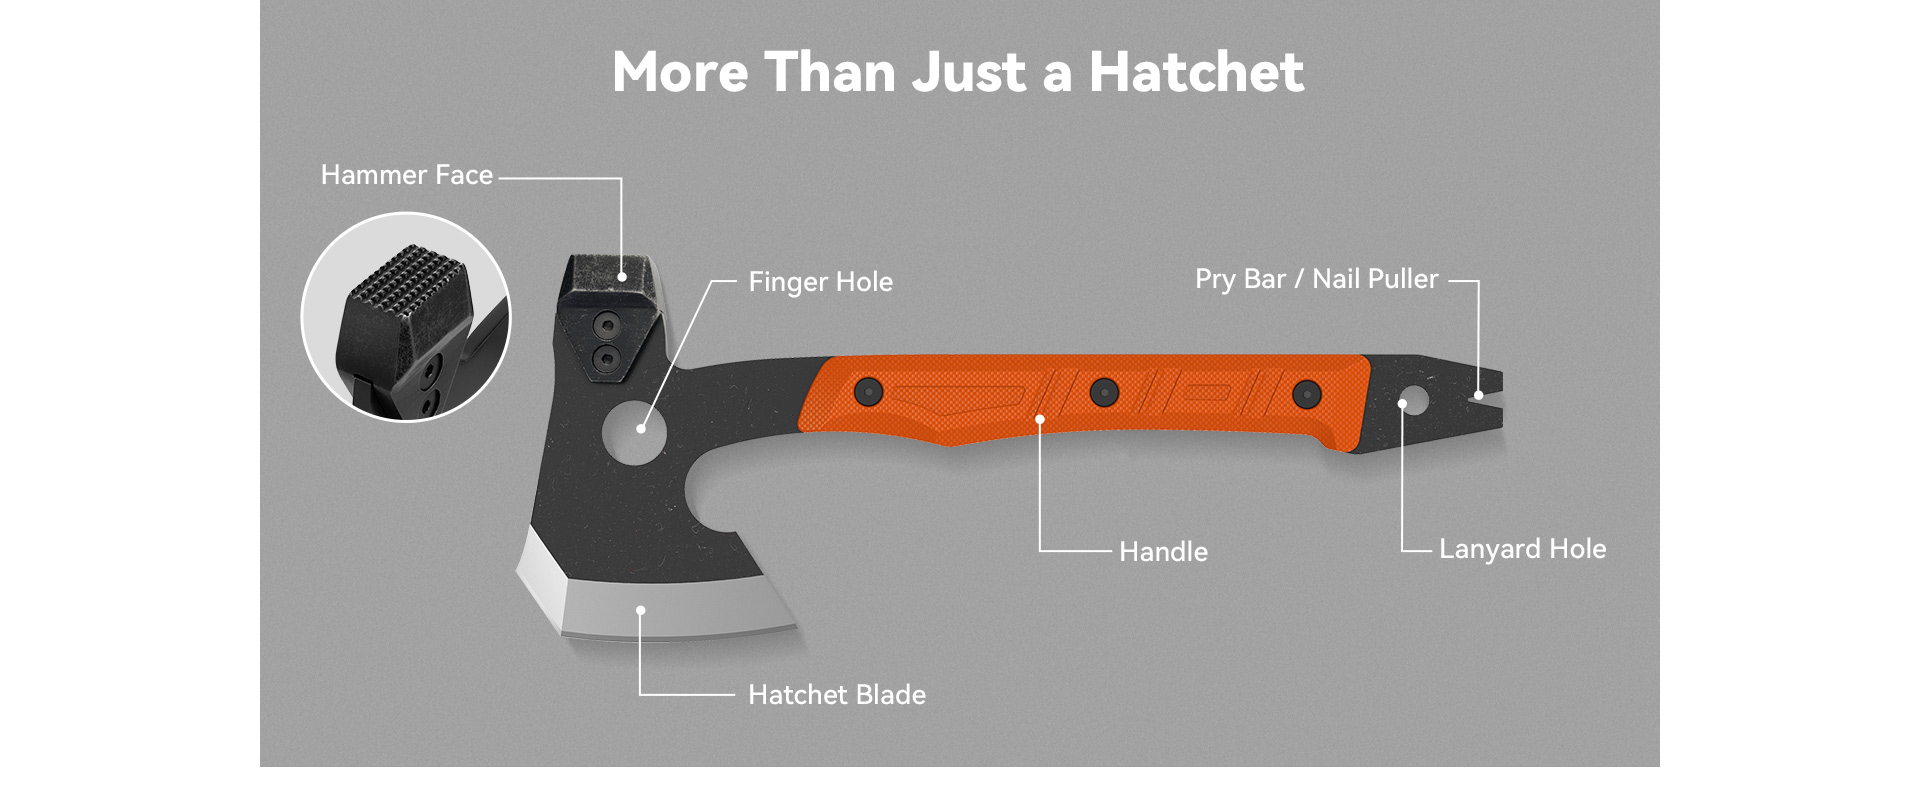 Built for any situation, this hatchet is robust enough for bushcraft and more than adequate for home use.